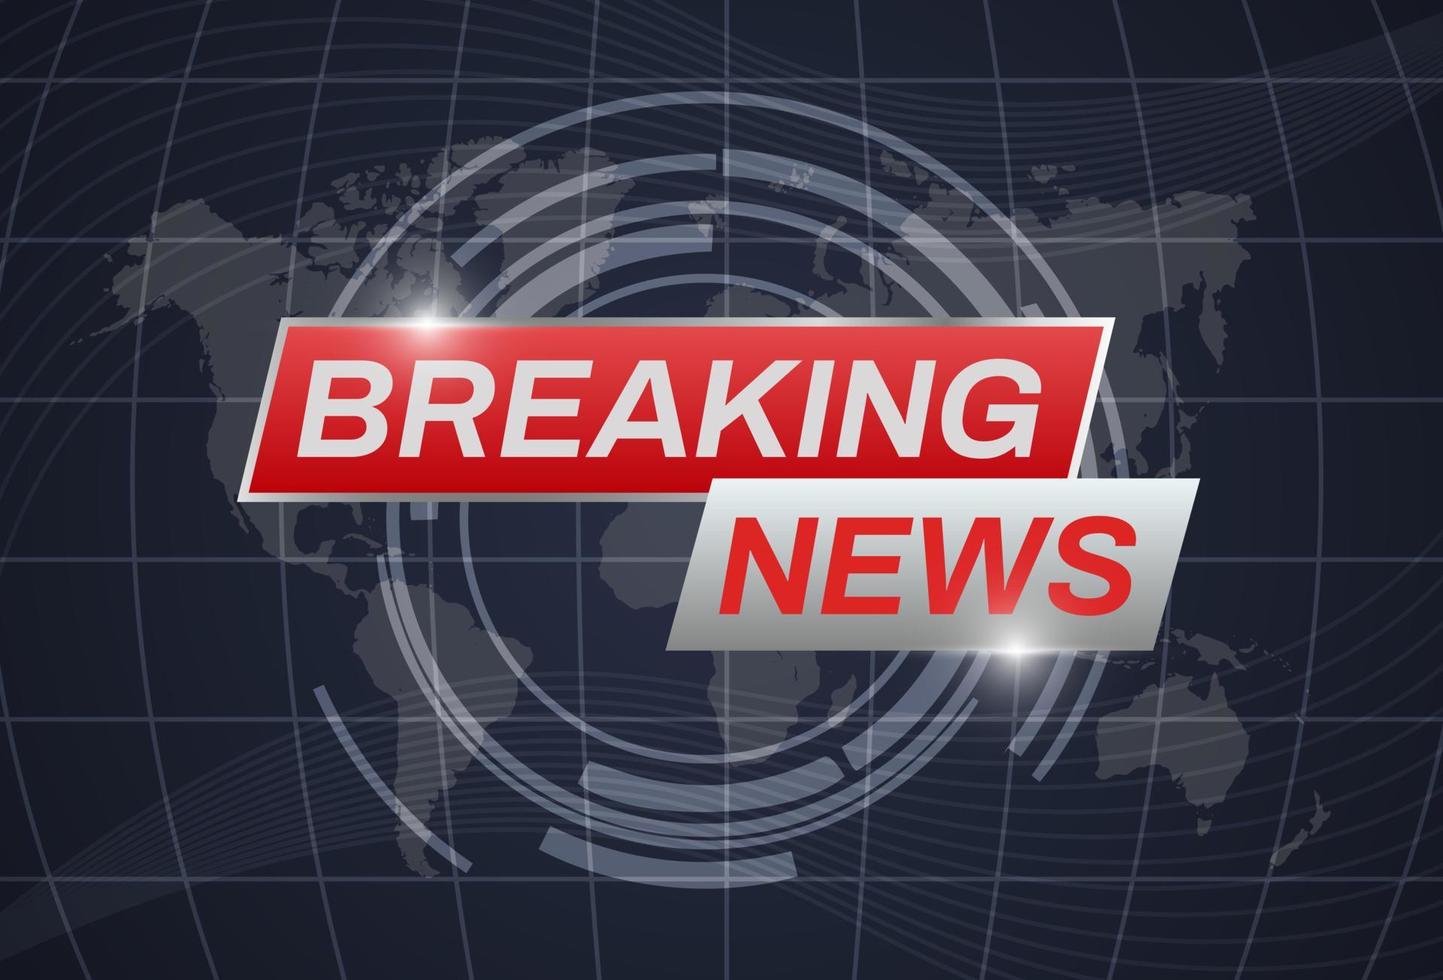 Breaking news broadcast concept design template for news channels or internet tv background. Breaking news backdrop vector